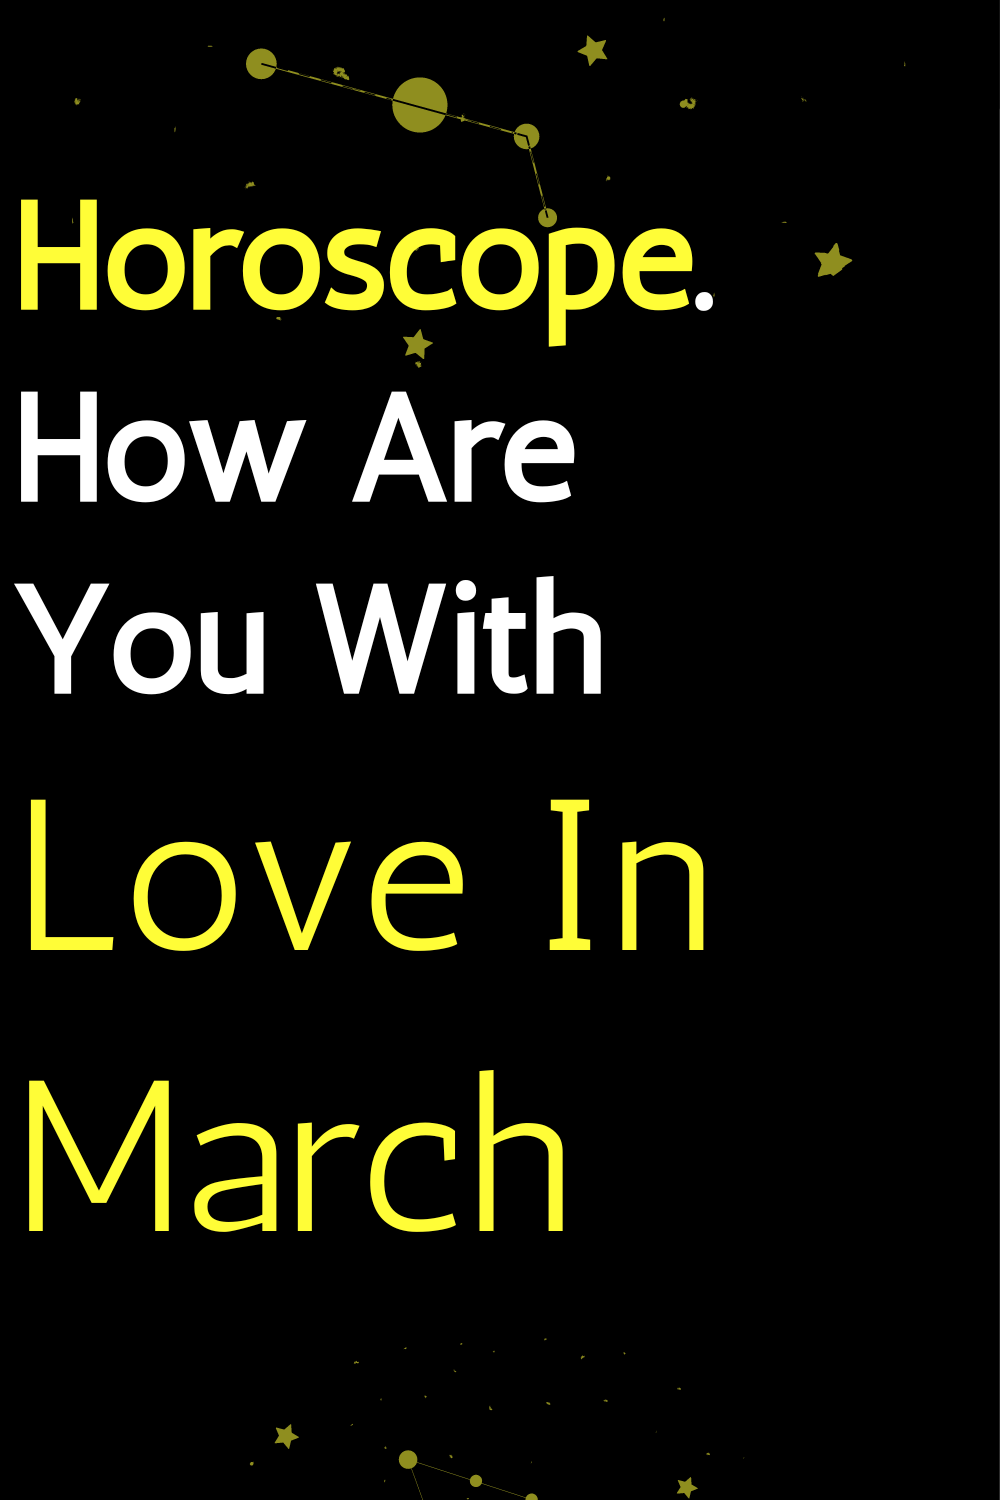 Horoscope. How Are You With Love In March